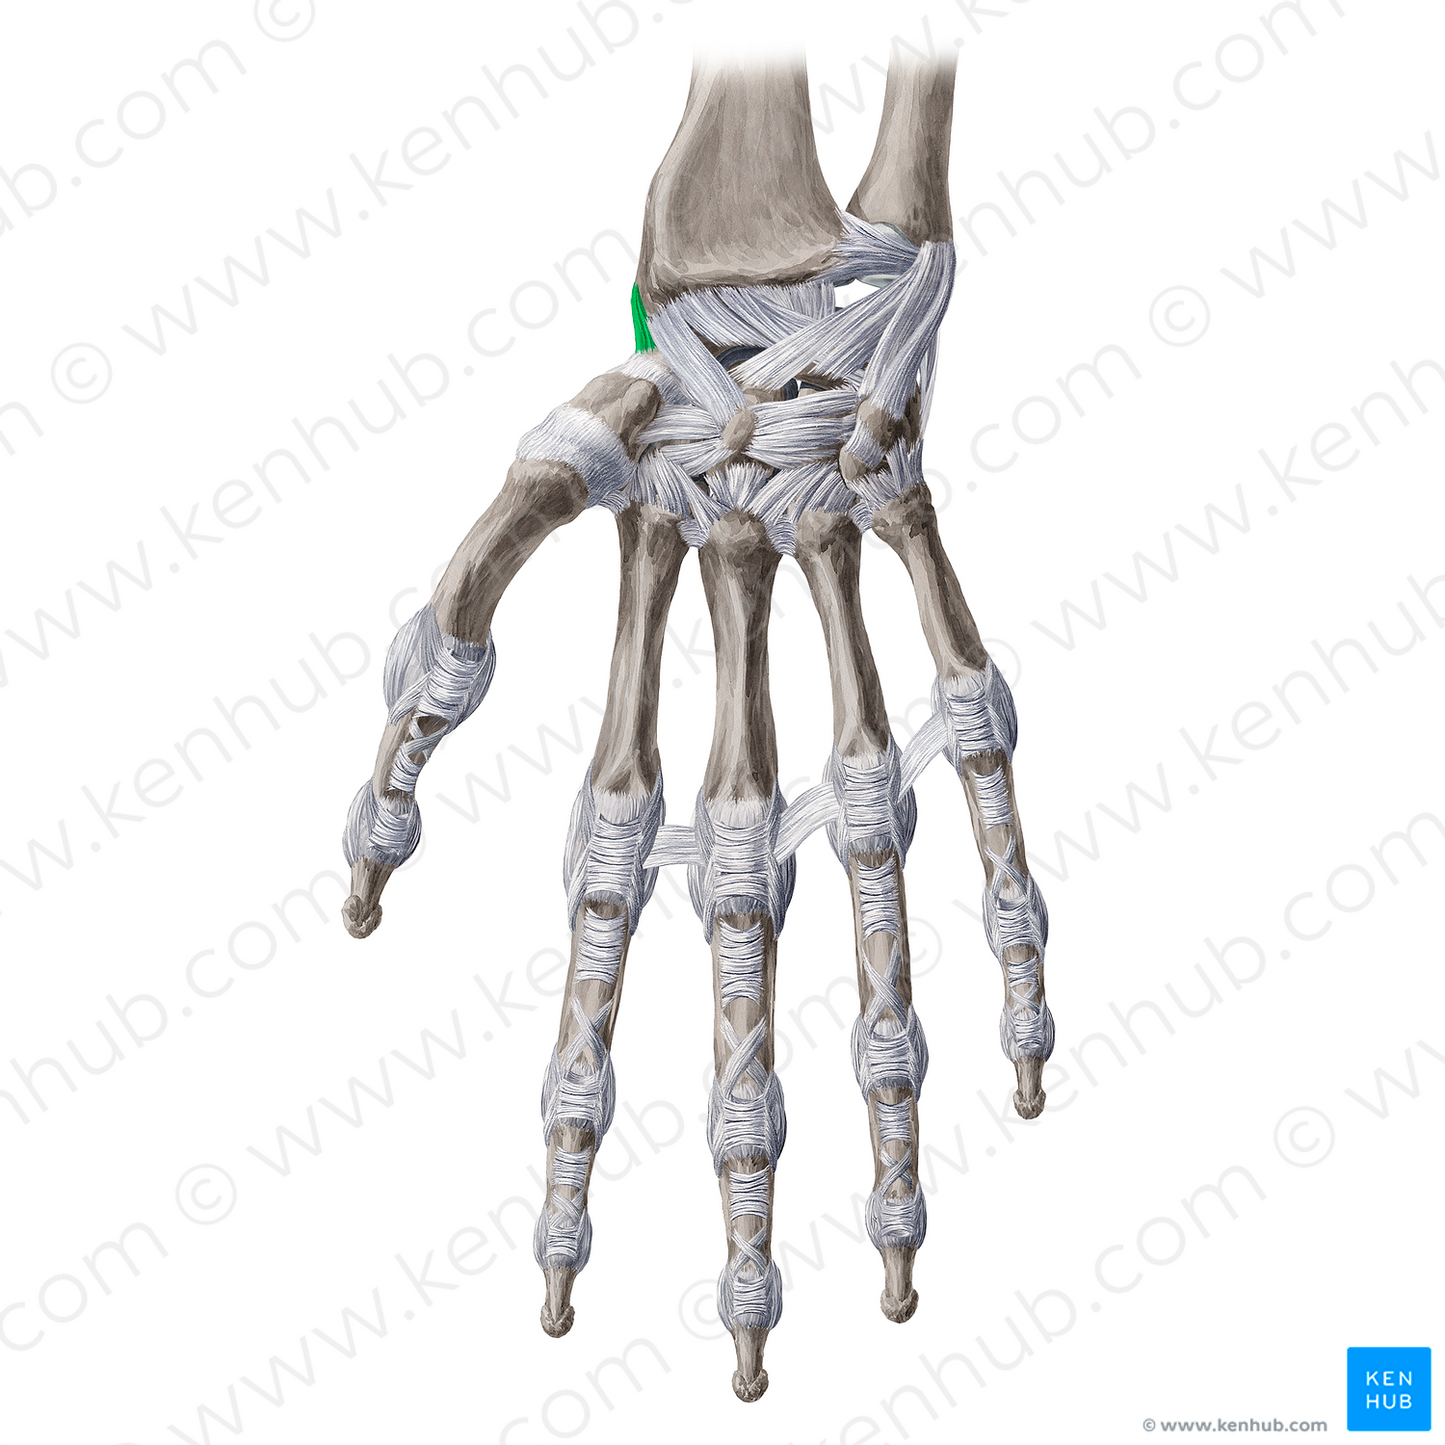 Radial collateral ligament of wrist joint (#4485)